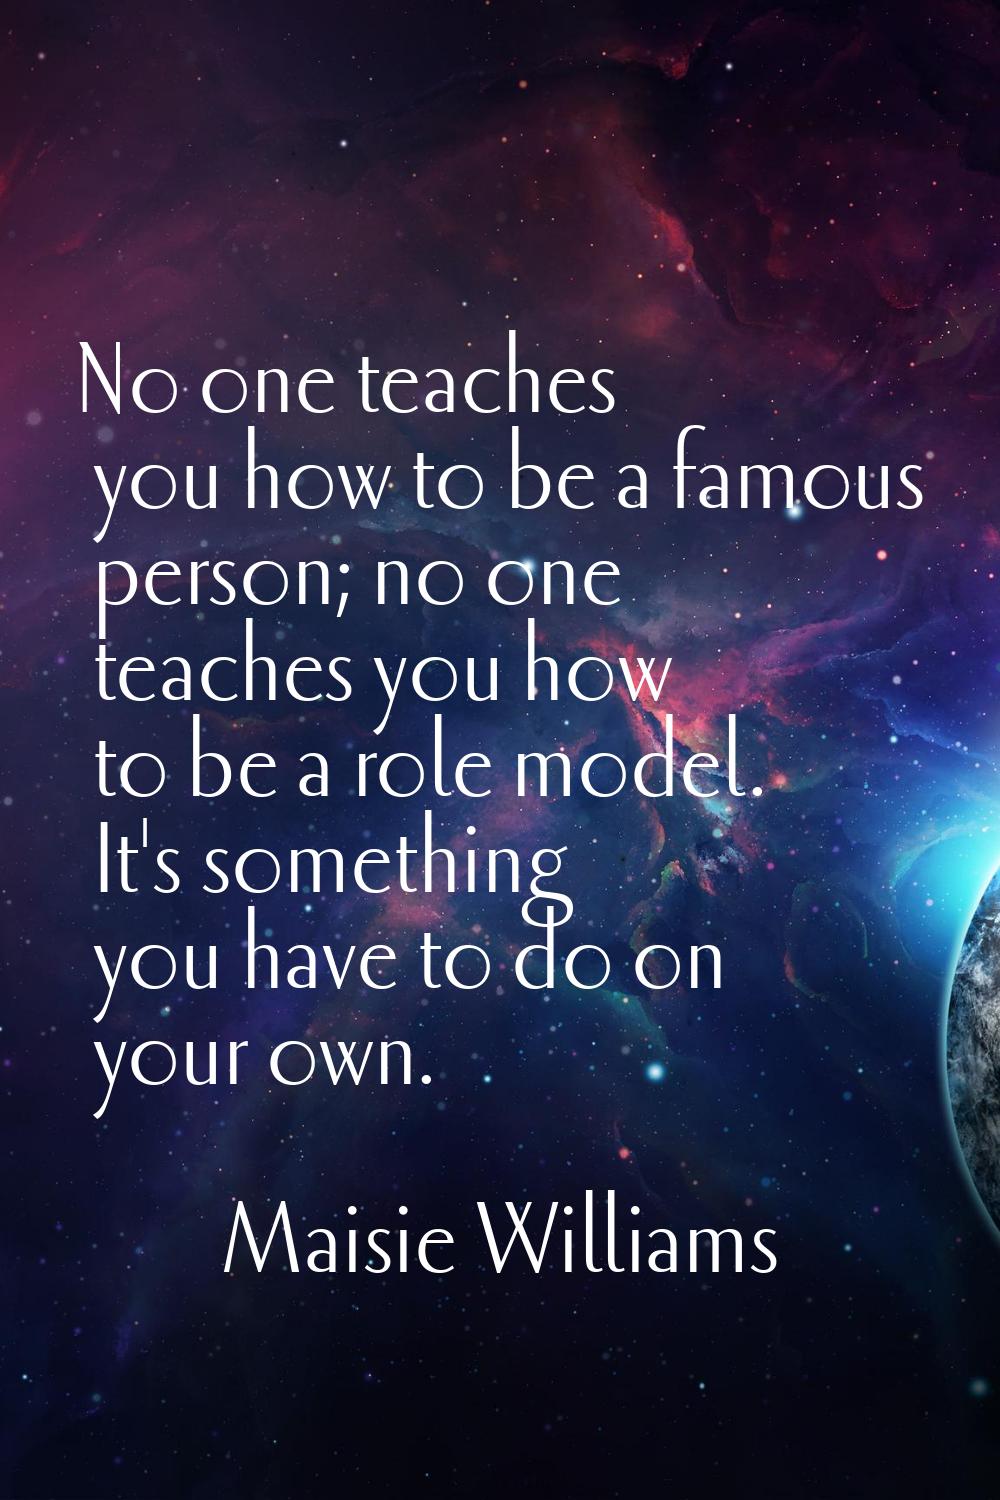 No one teaches you how to be a famous person; no one teaches you how to be a role model. It's somet